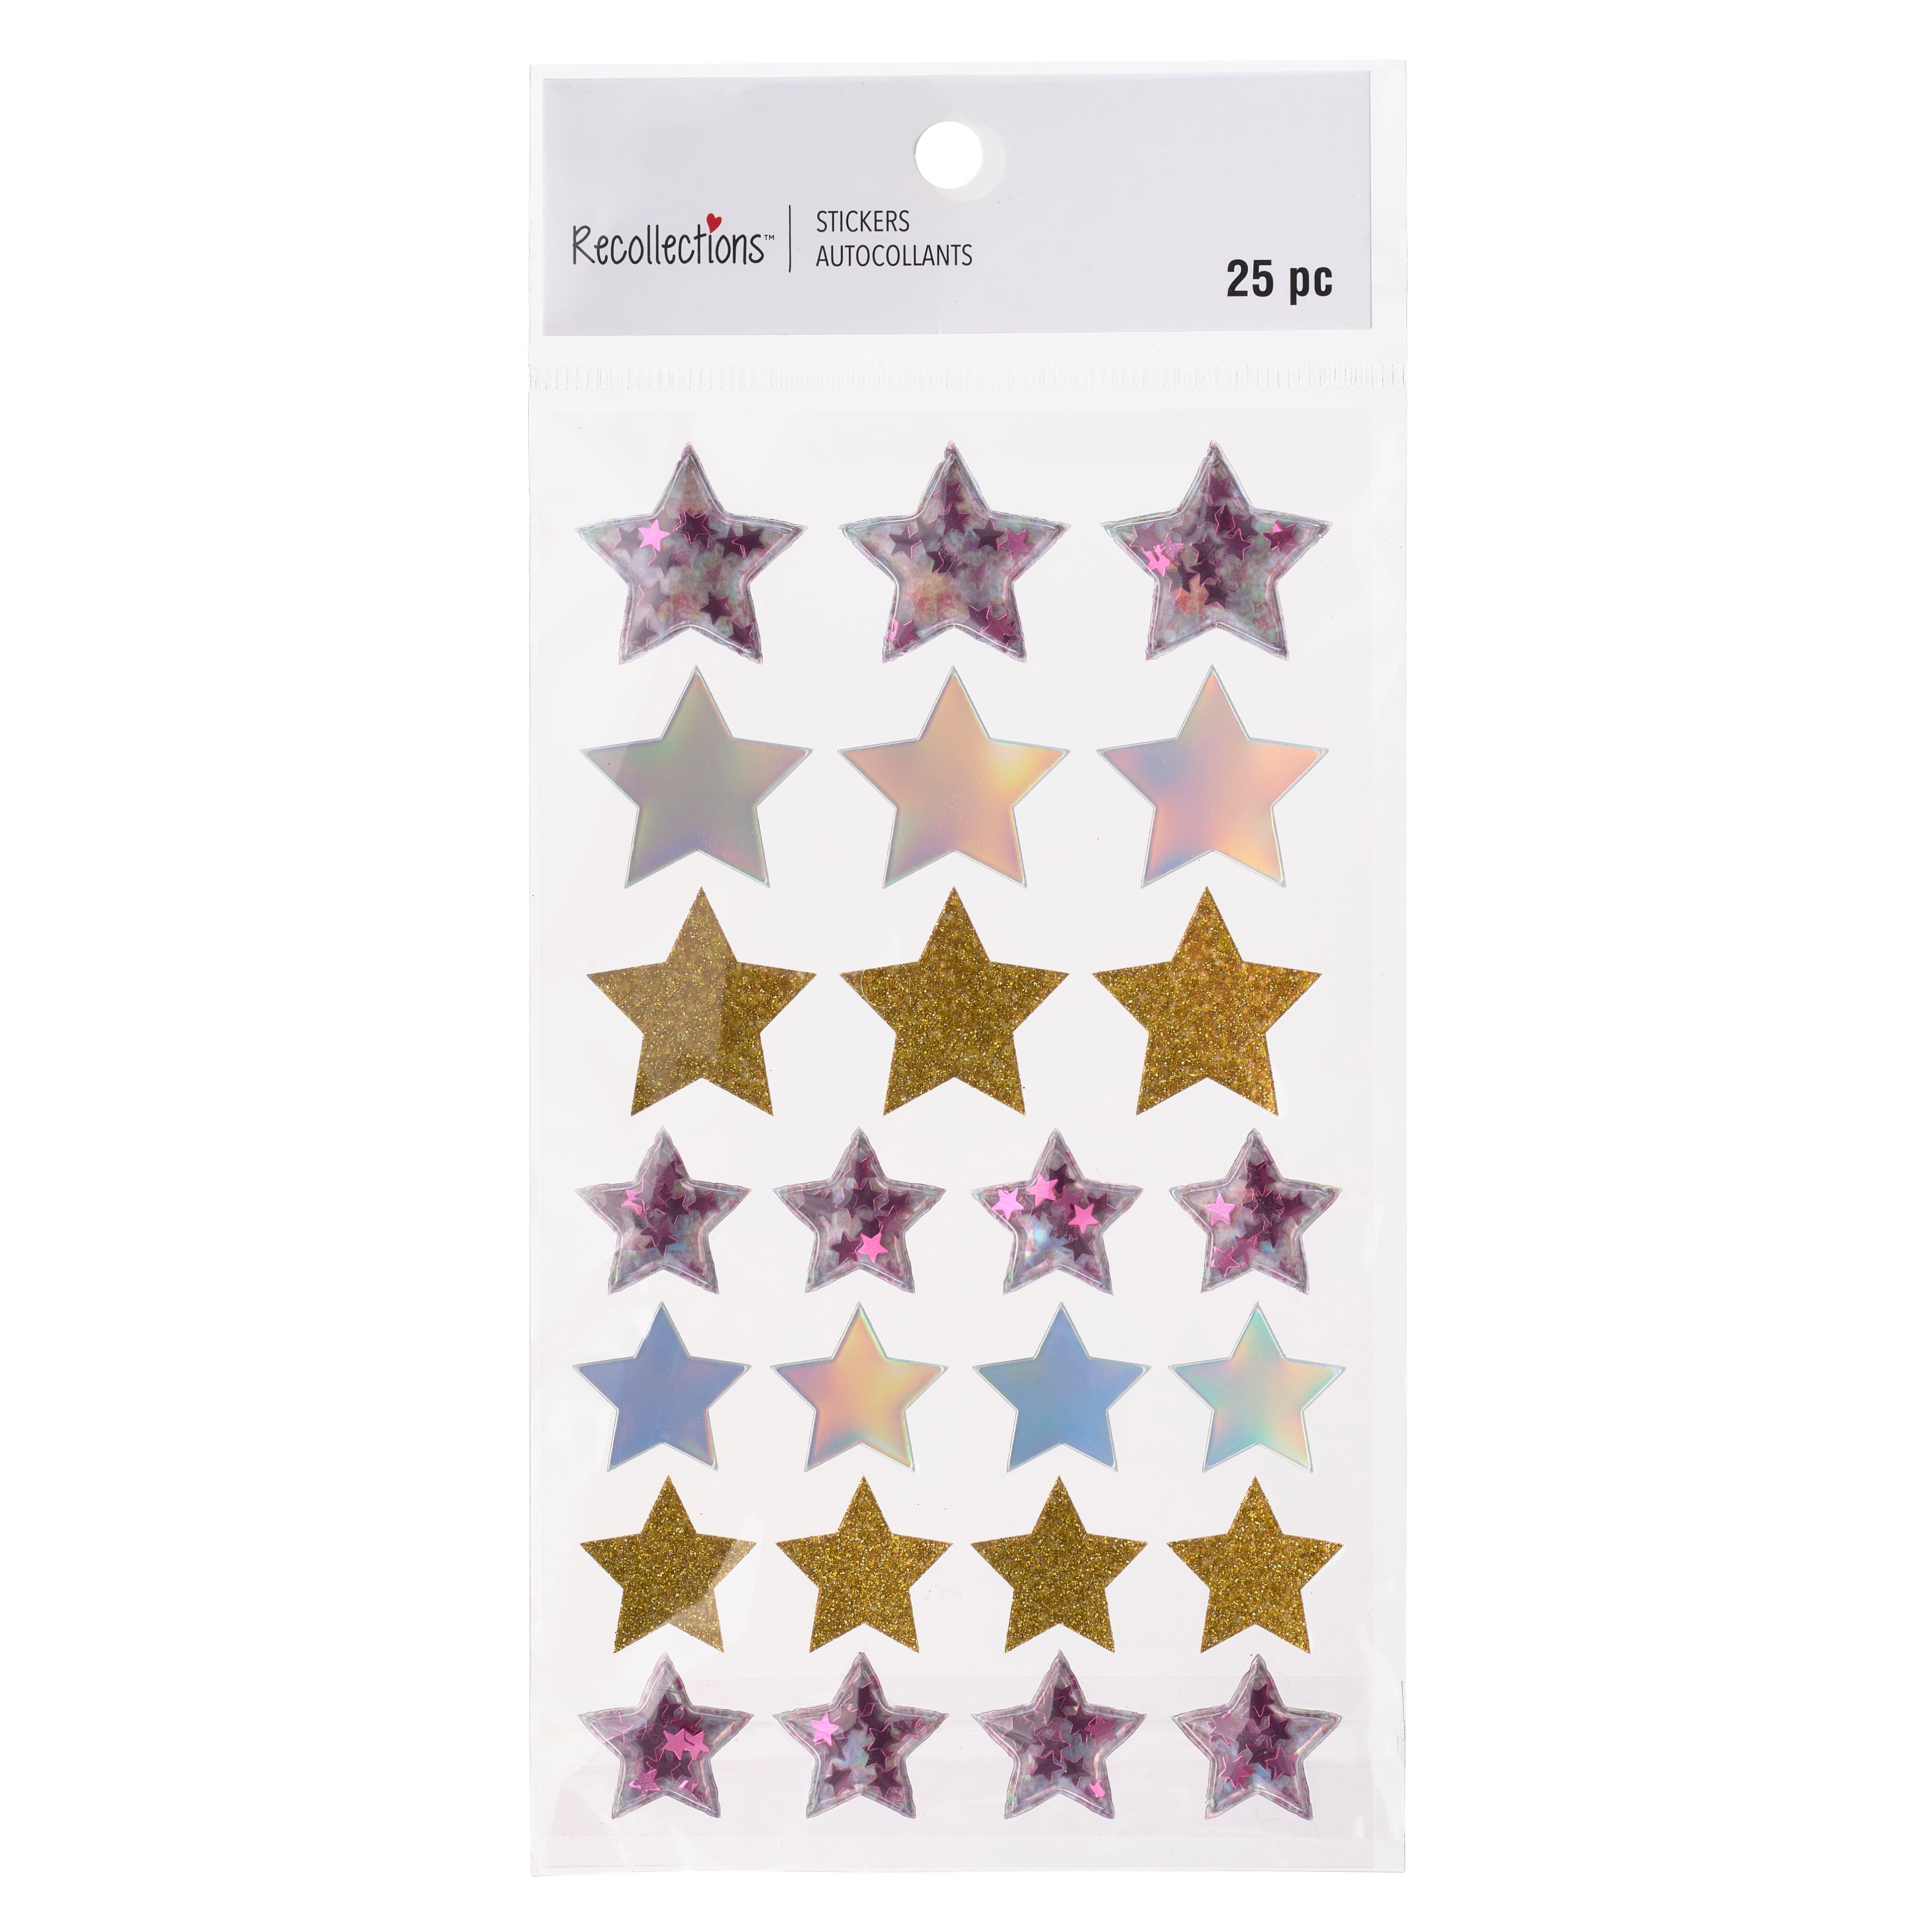 Recollections Mini Star Stickers - 306 ct